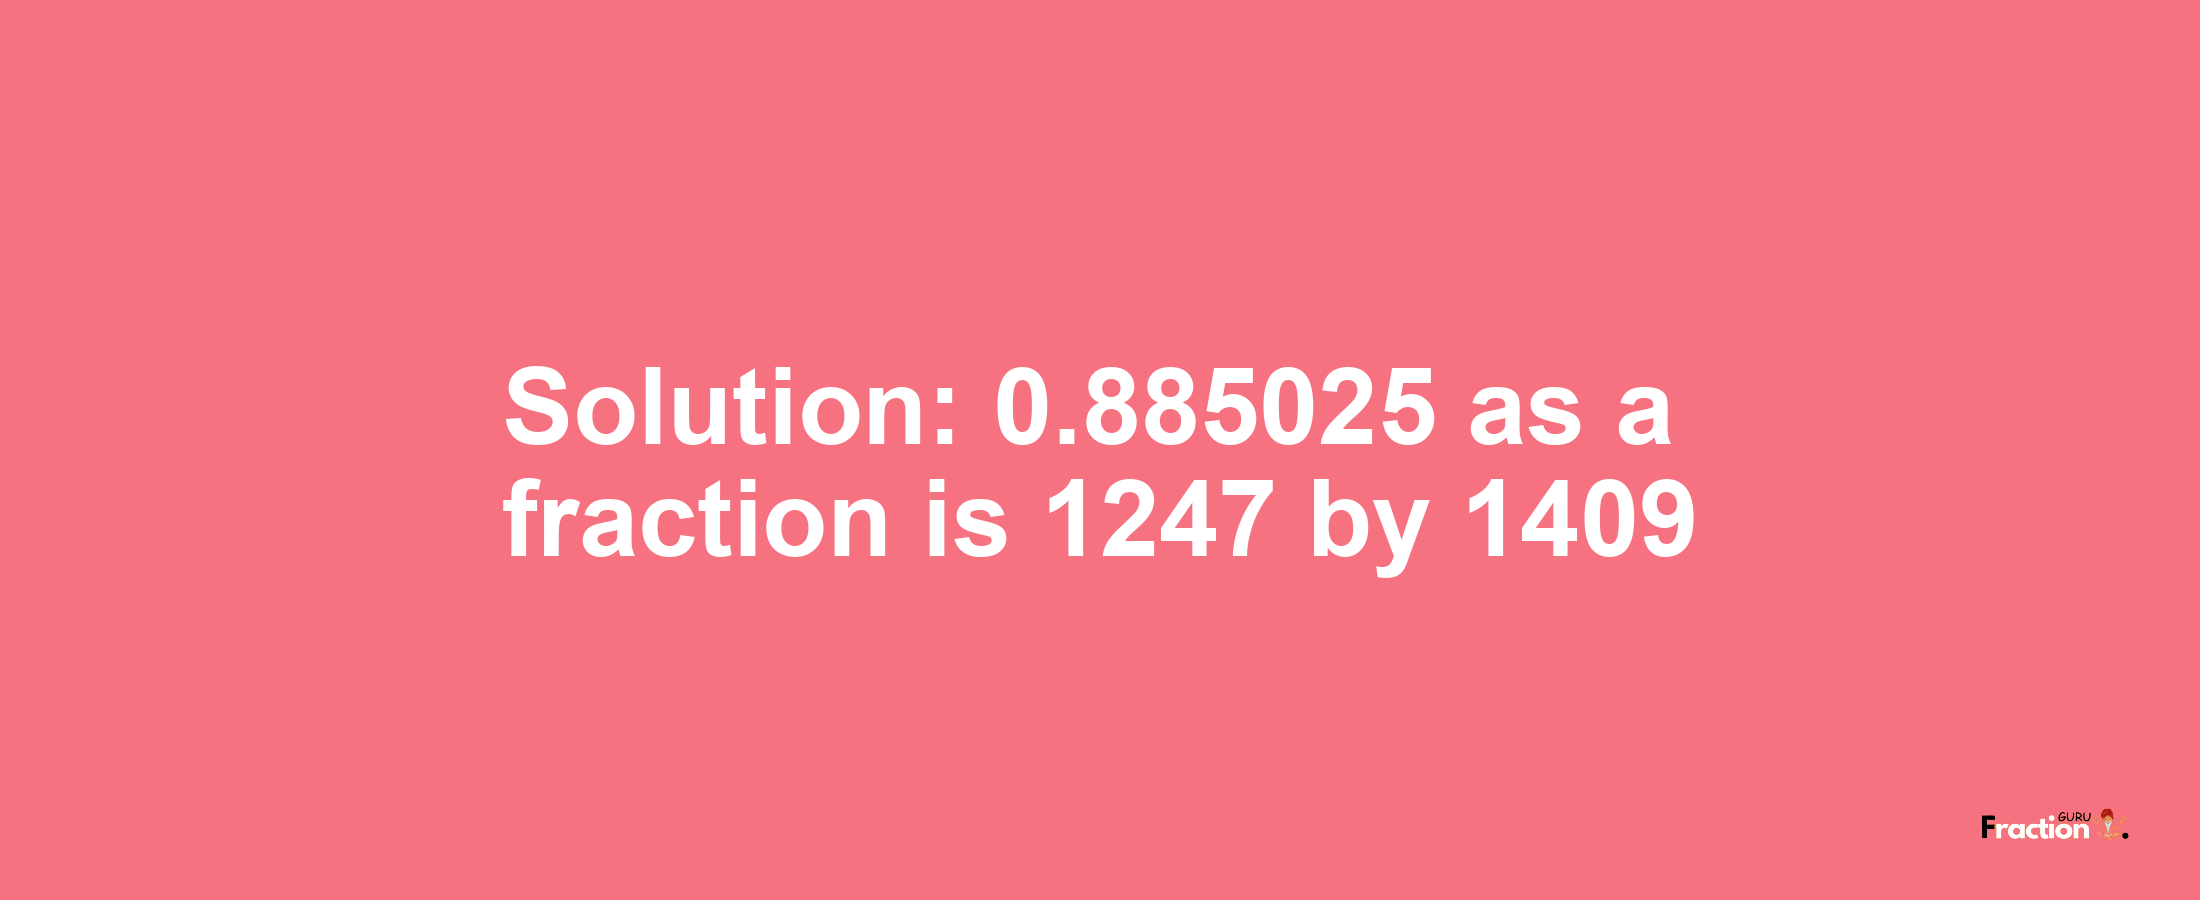 Solution:0.885025 as a fraction is 1247/1409